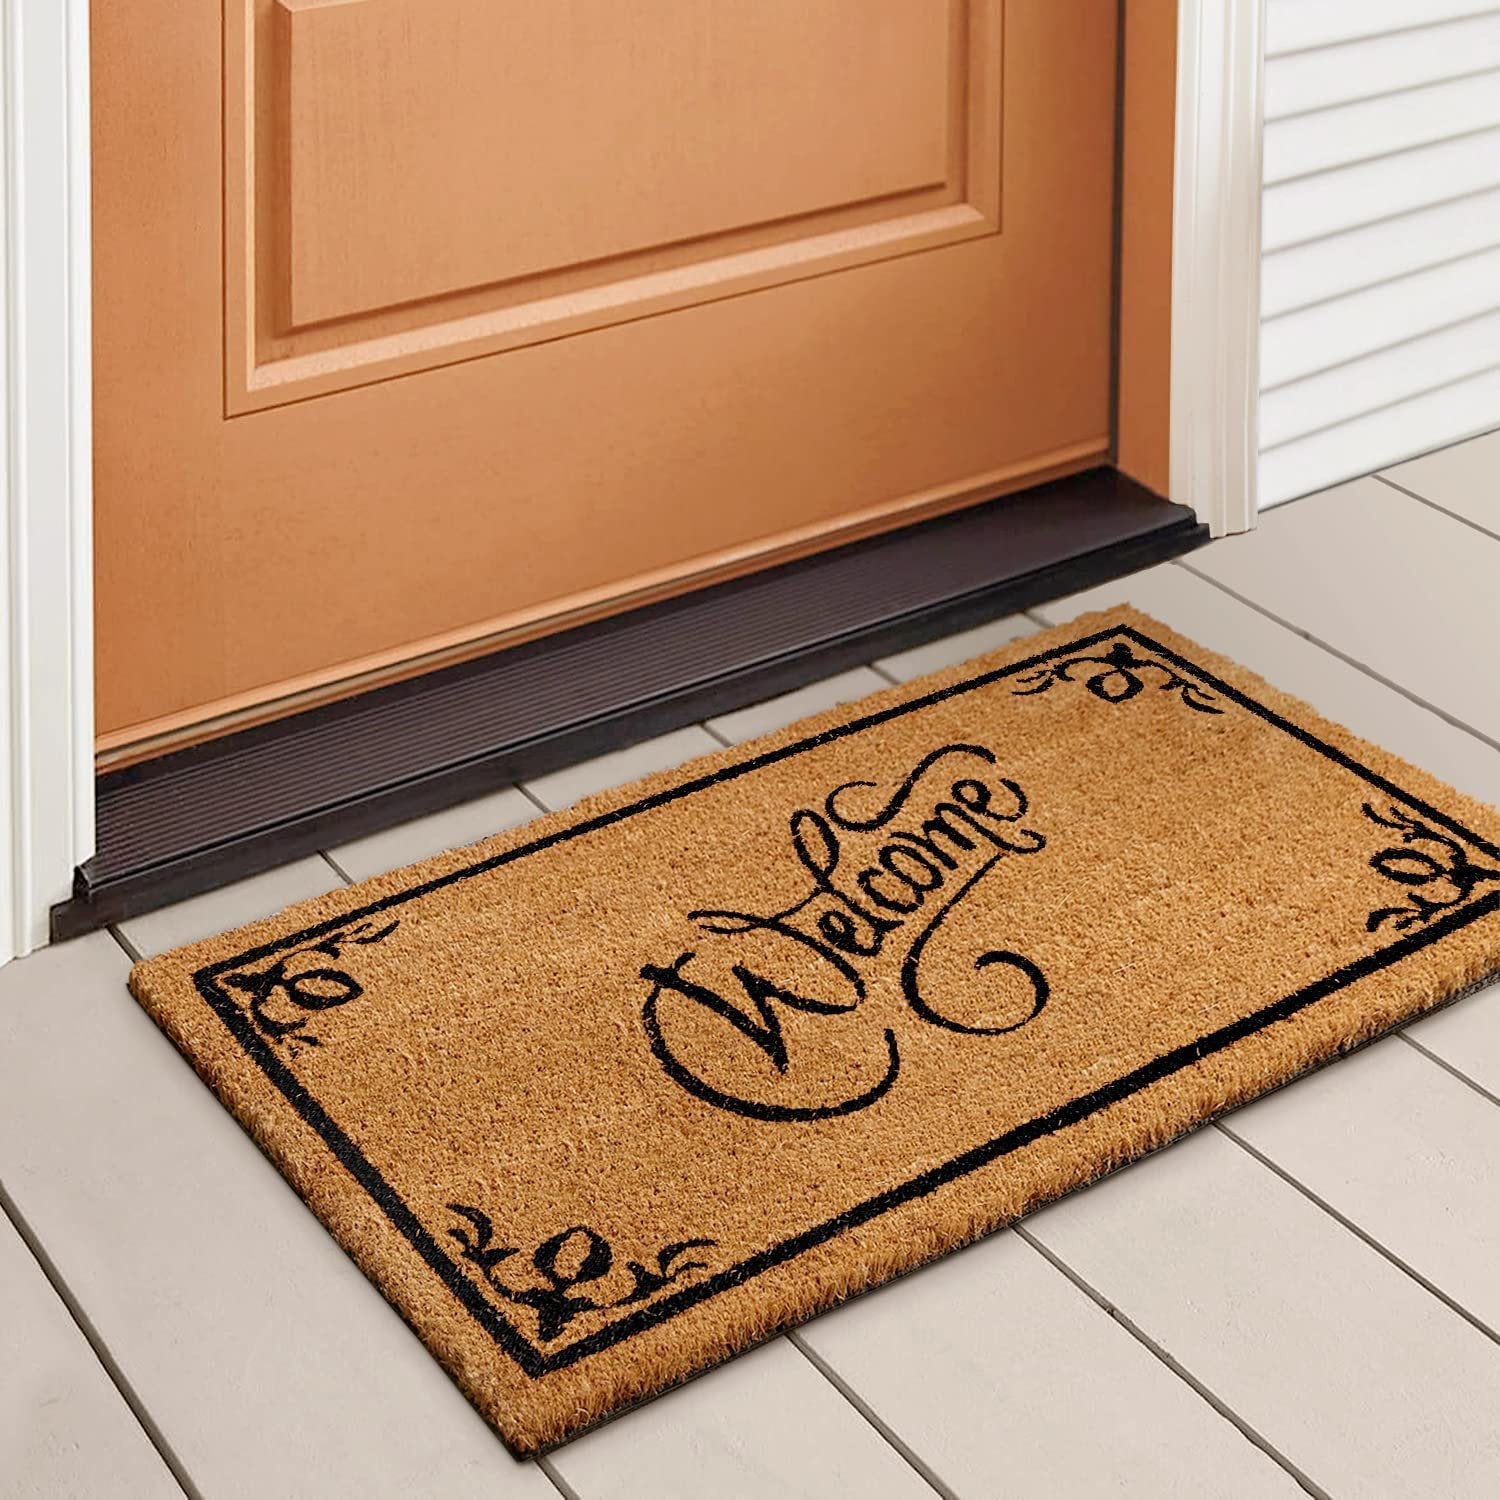 LuxUrux Welcome Mats Outdoor Coco Coir Doormat, with Heavy-Duty PVC Backing - Natural - Perfect Color/Sizing for Outdoor/Indoor uses.,30 x 17.